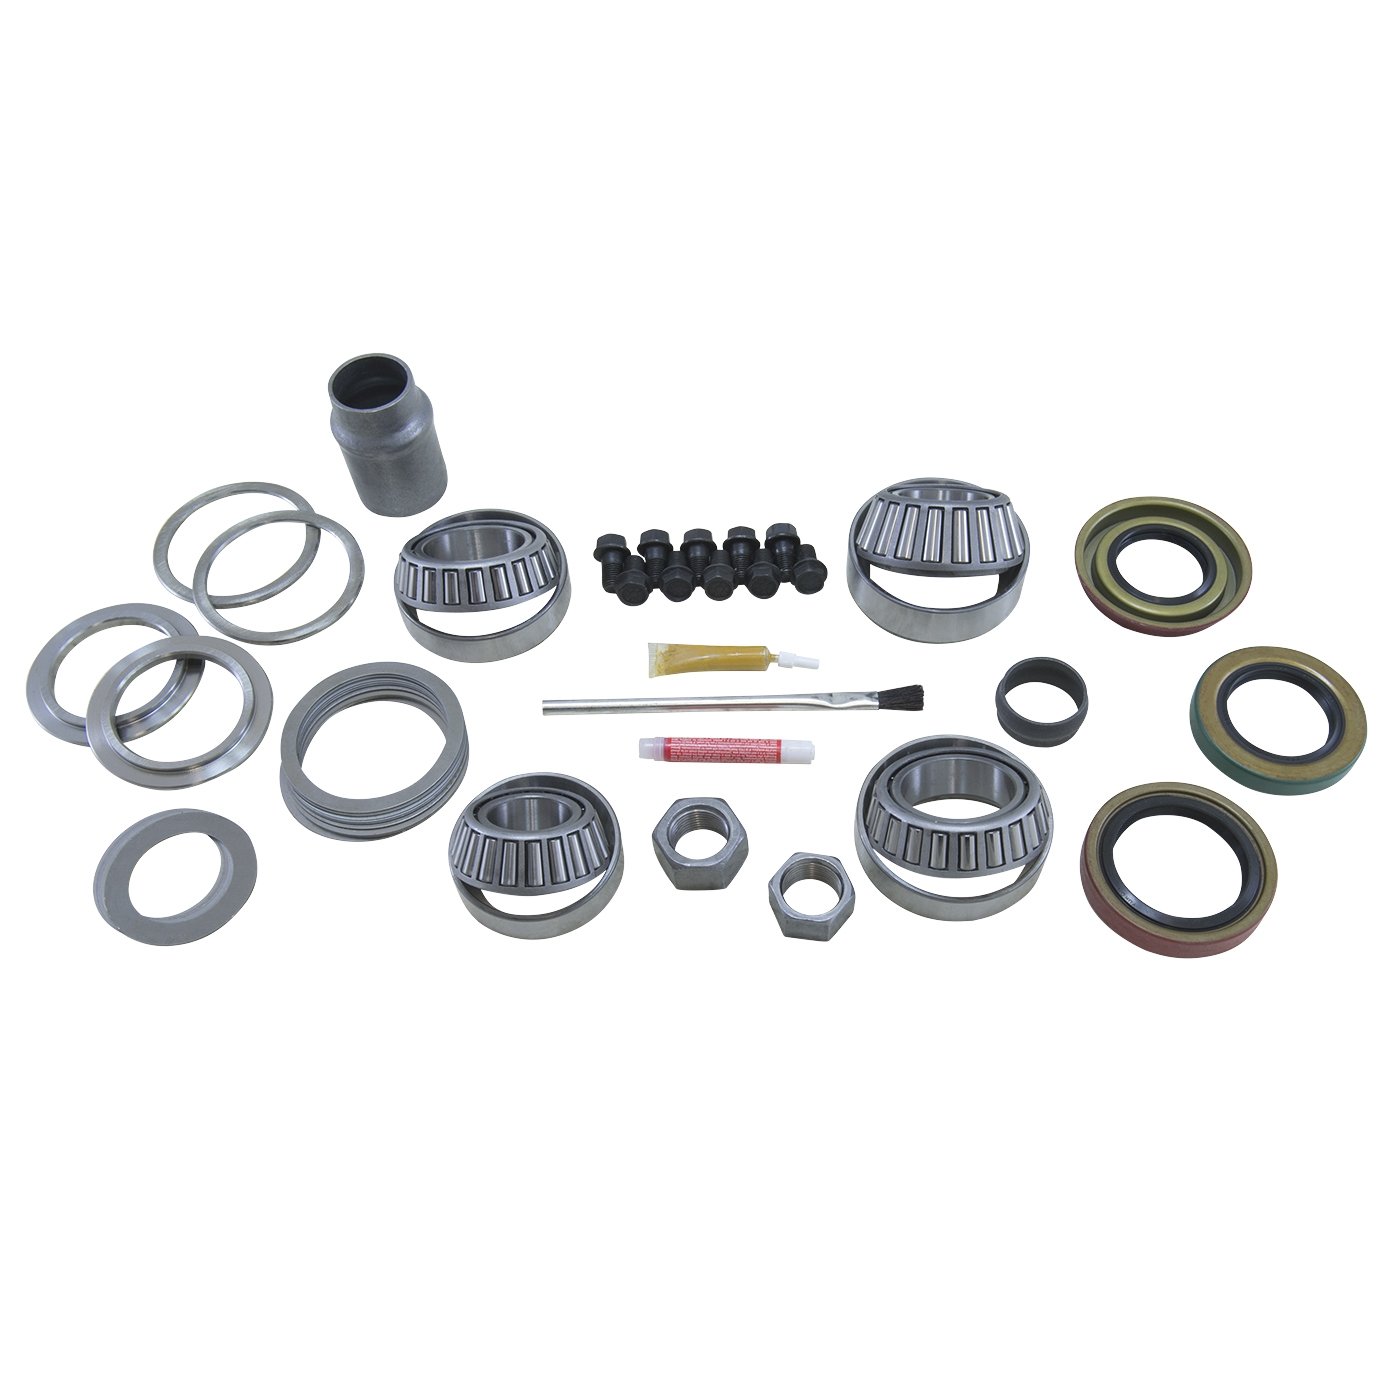 USA Standard ZK GM8.2BOP Master Overhaul Kit, For The 8.2 in. Buick, Old'S, Pontiac Differential